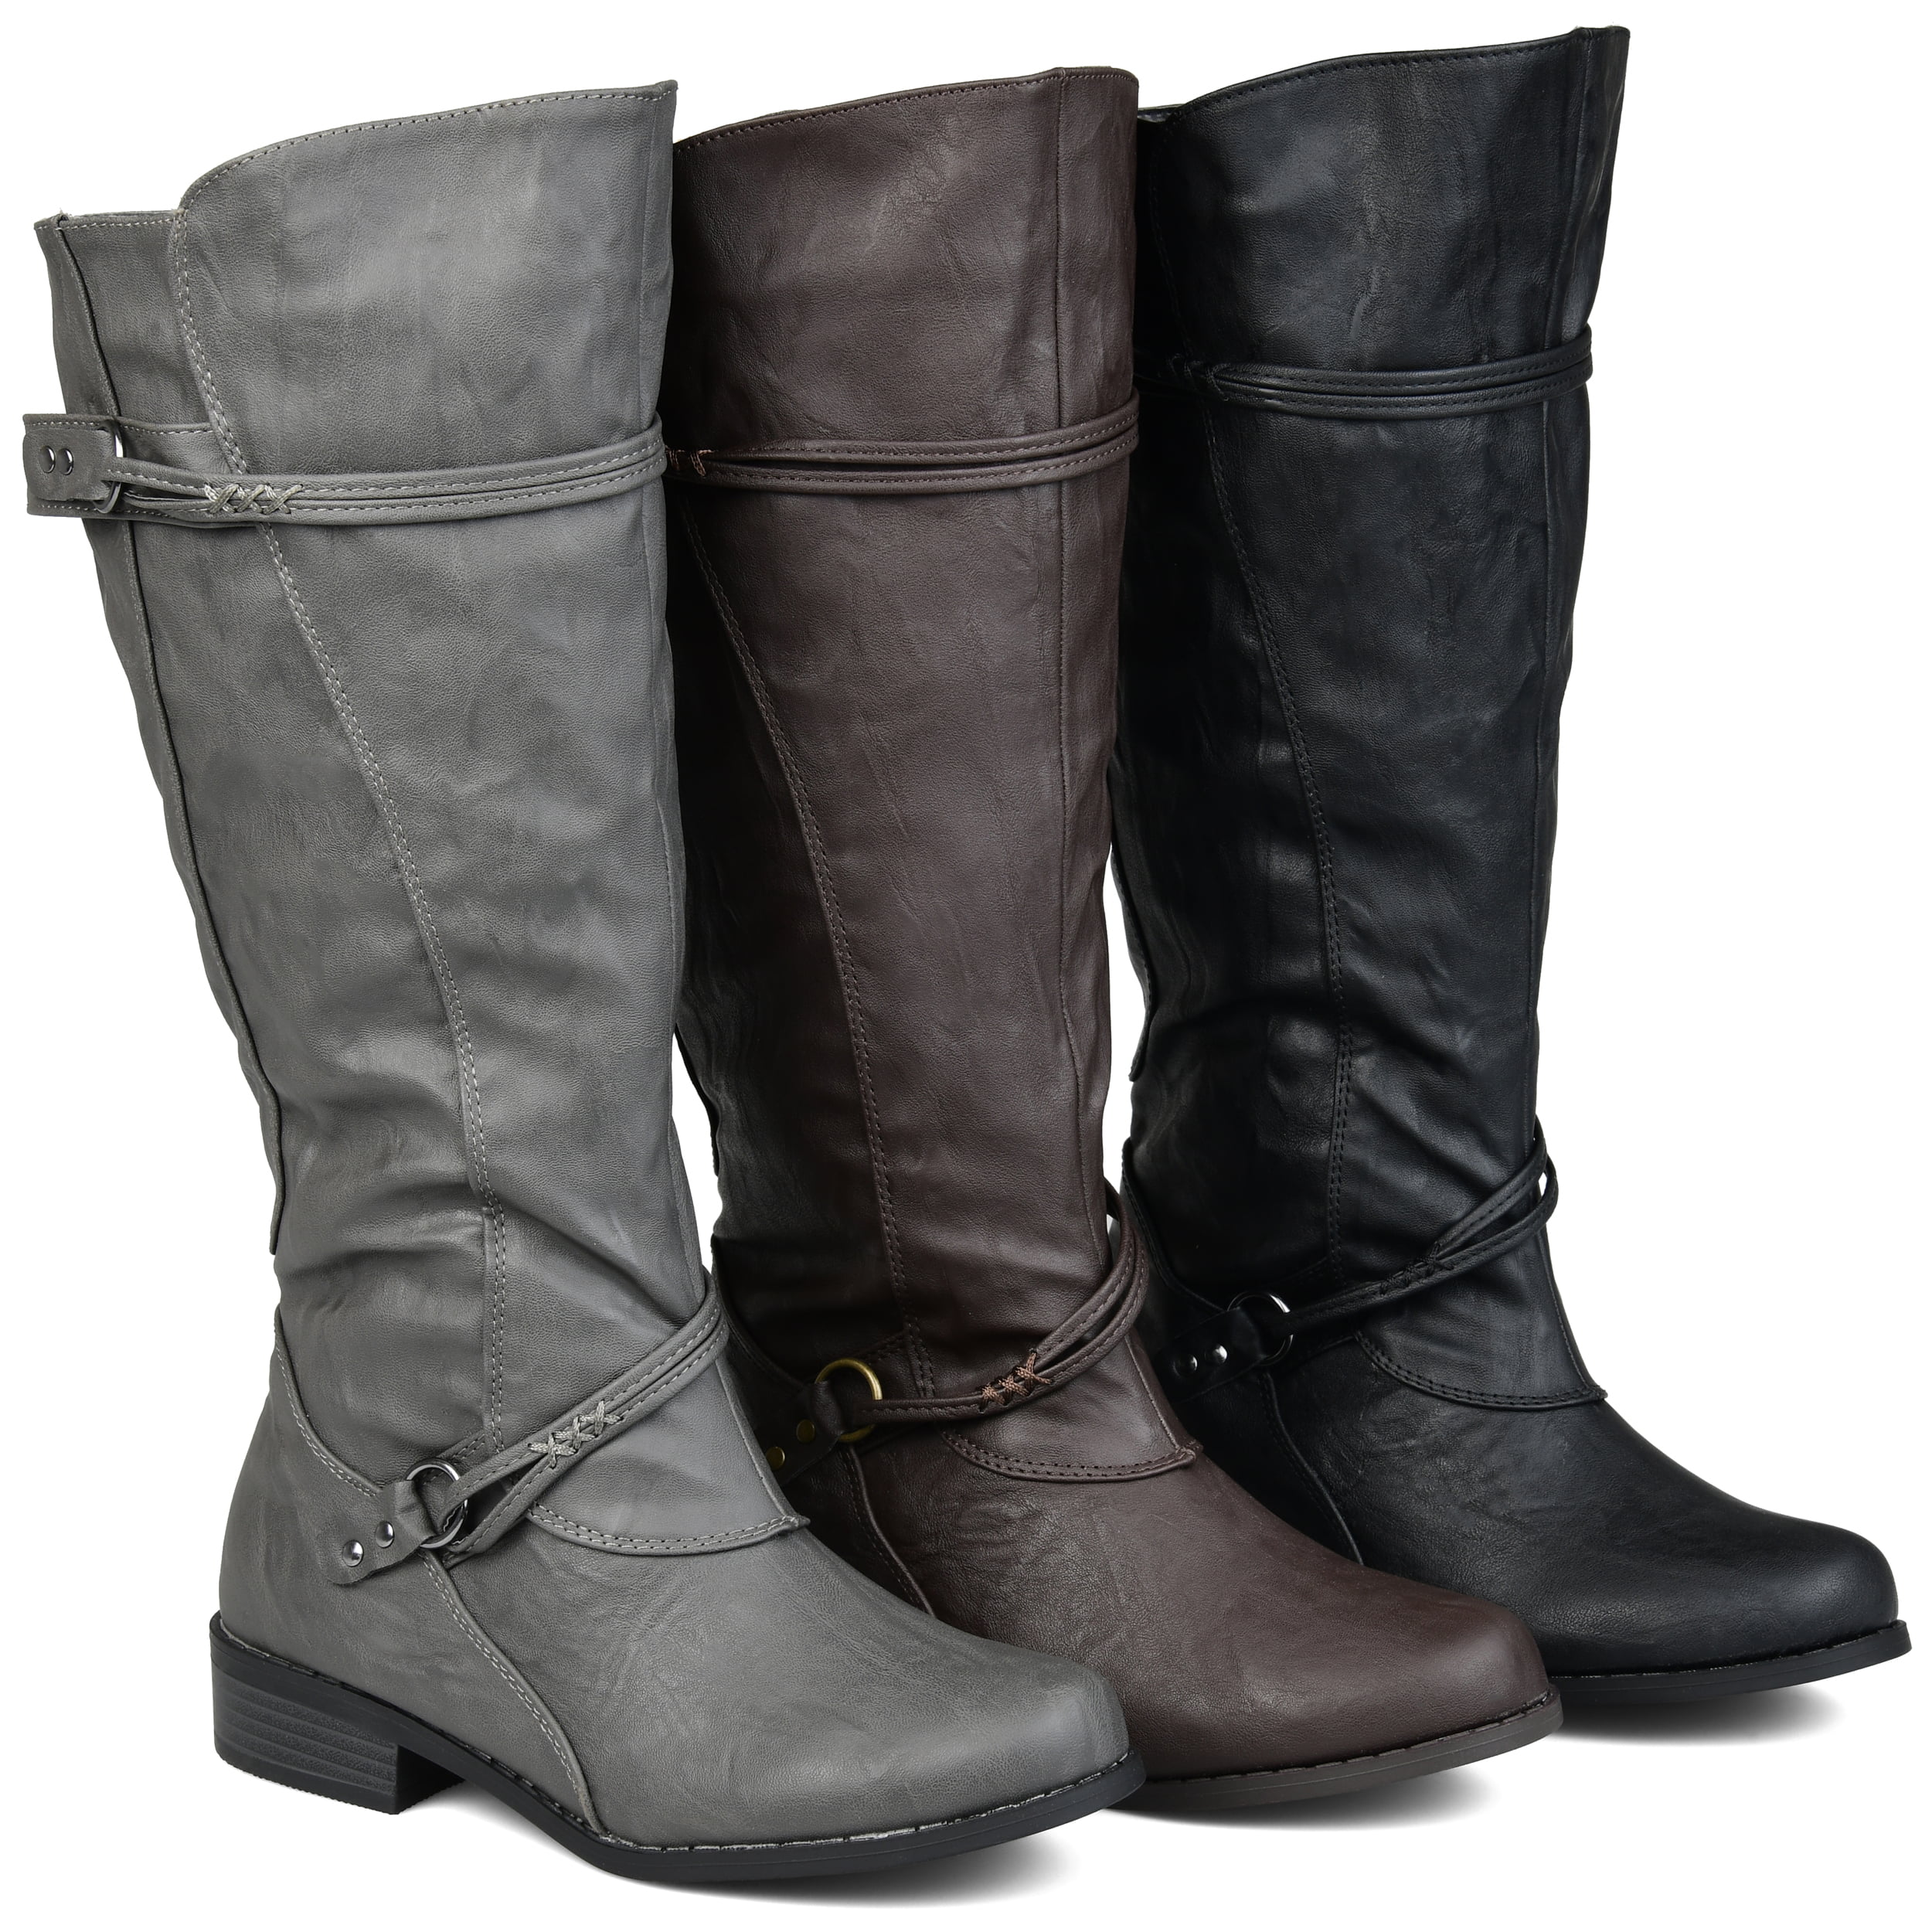 real leather wide calf riding boots